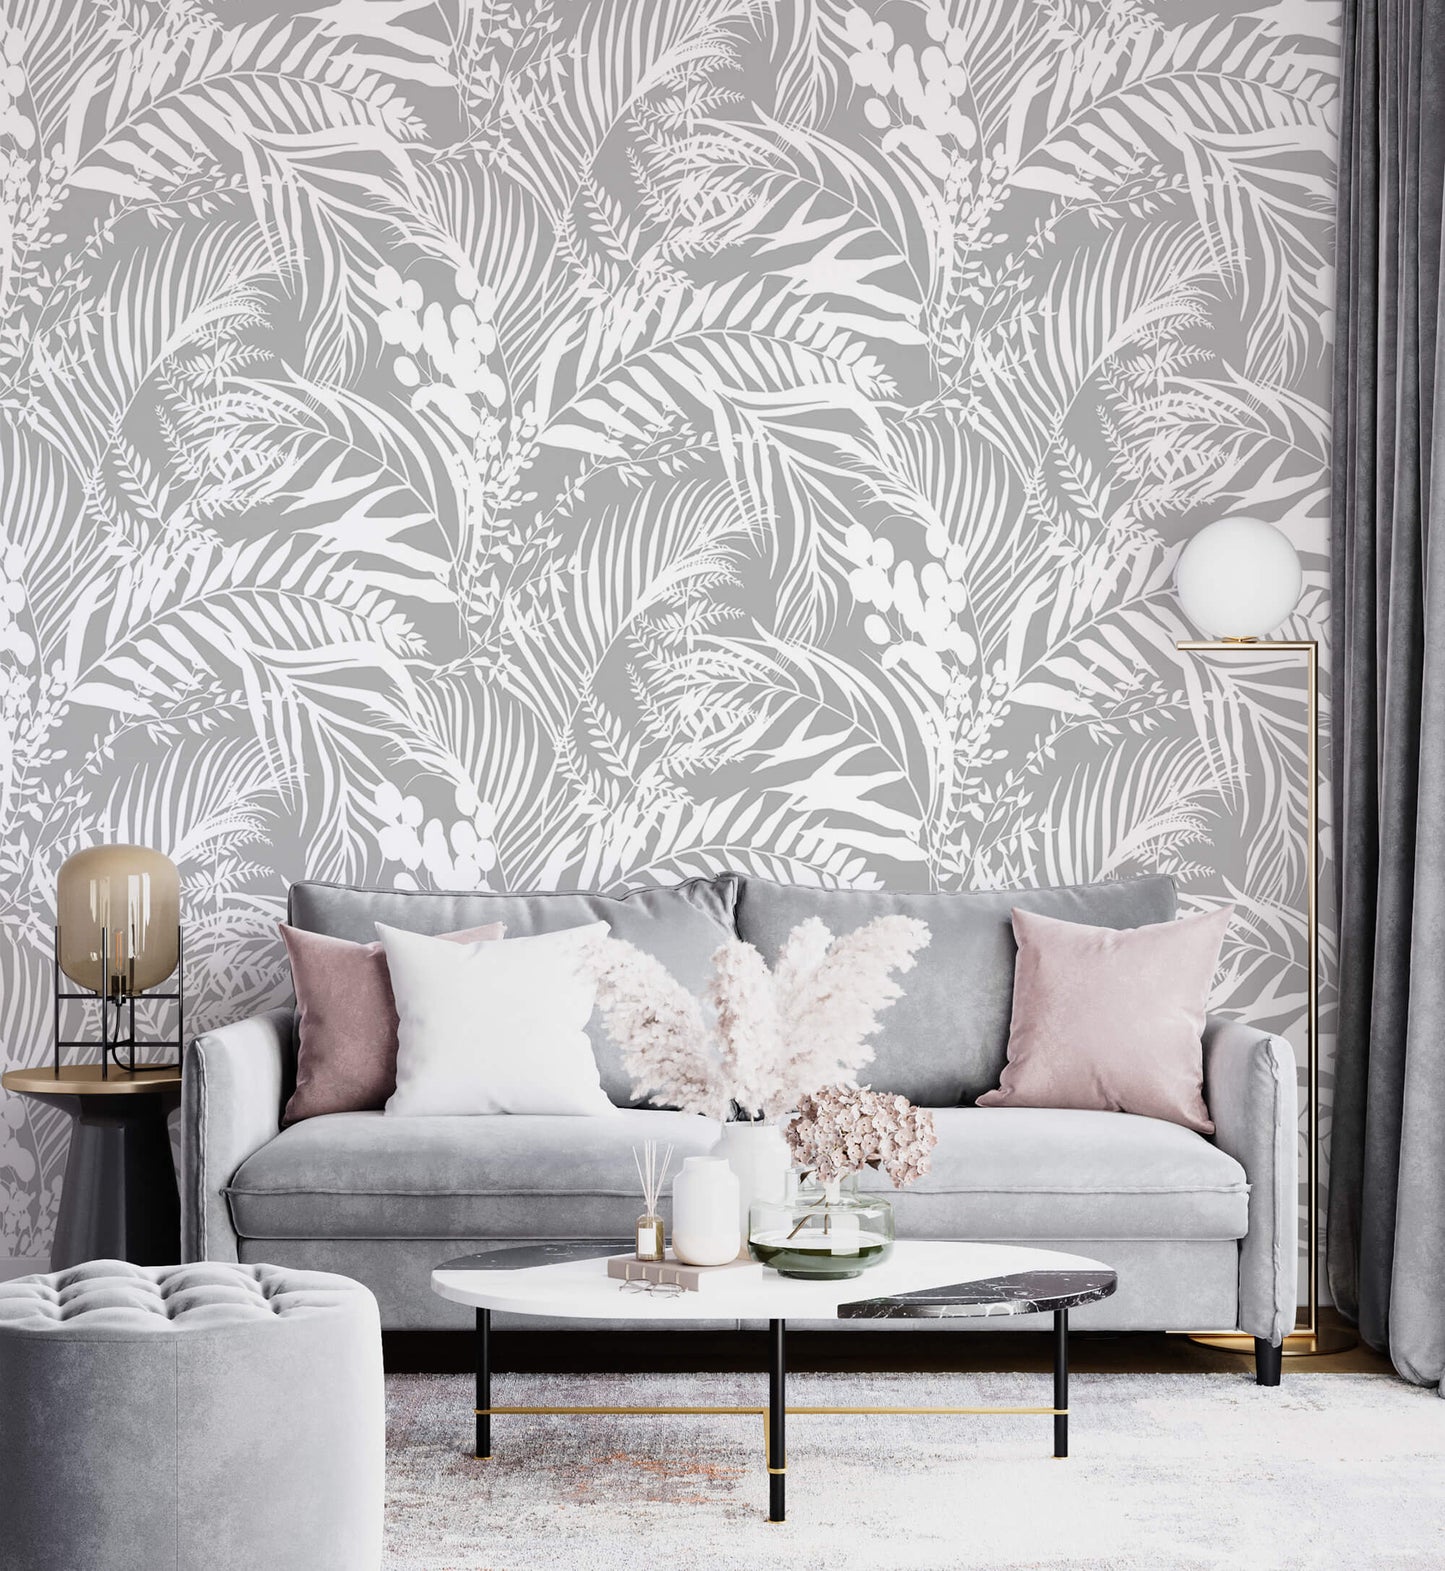 Grey Tropical Foliage Wallpaper: Bring a touch of tropical paradise into your space with this understated yet elegant design, featuring lush foliage in shades of grey that evoke a sense of serenity and sophistication.